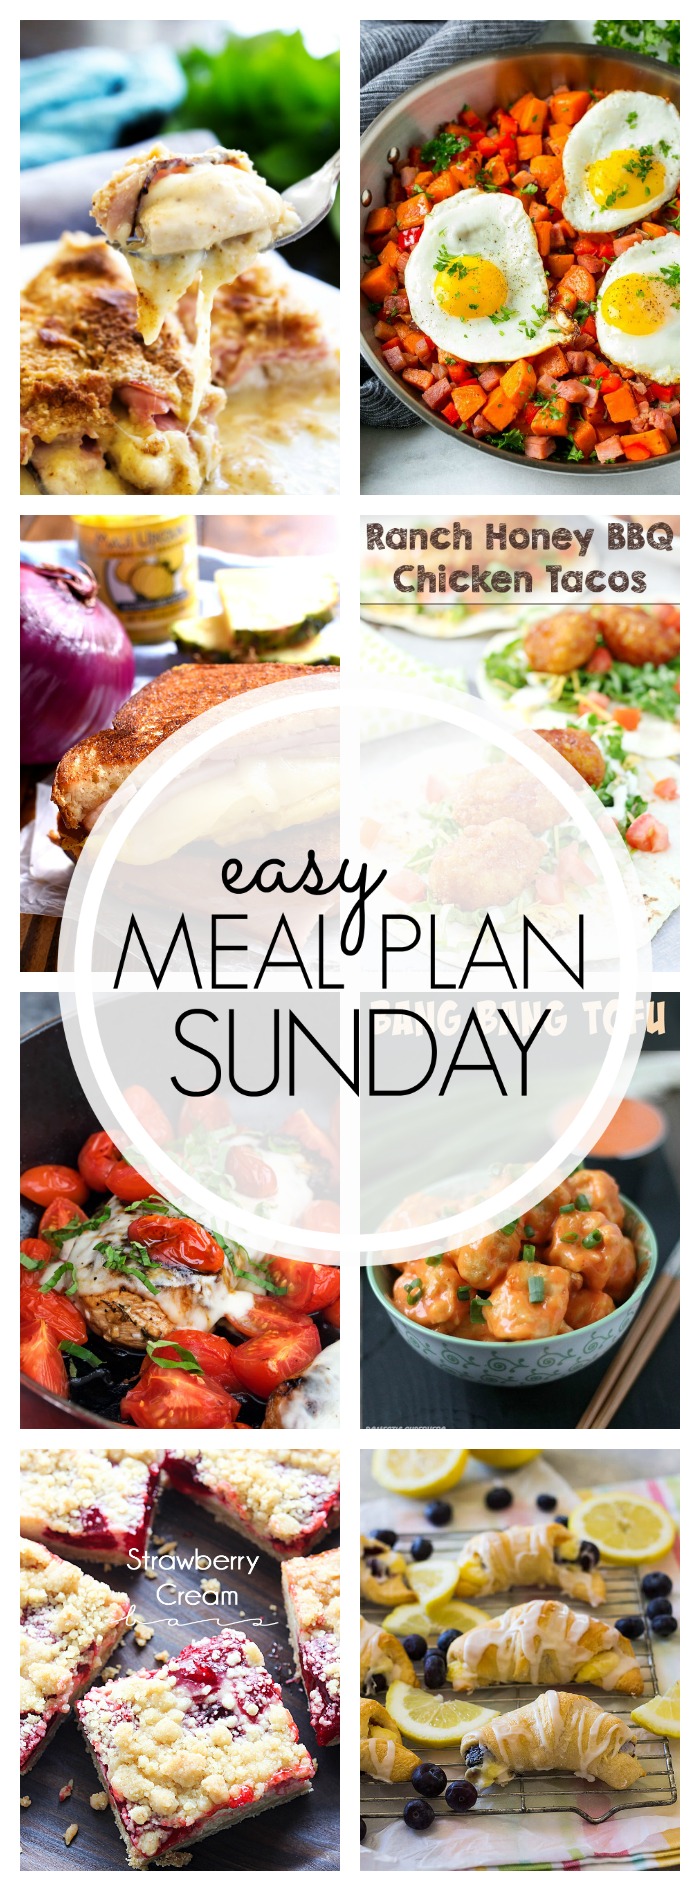 Easy Meal Plan Sunday #94